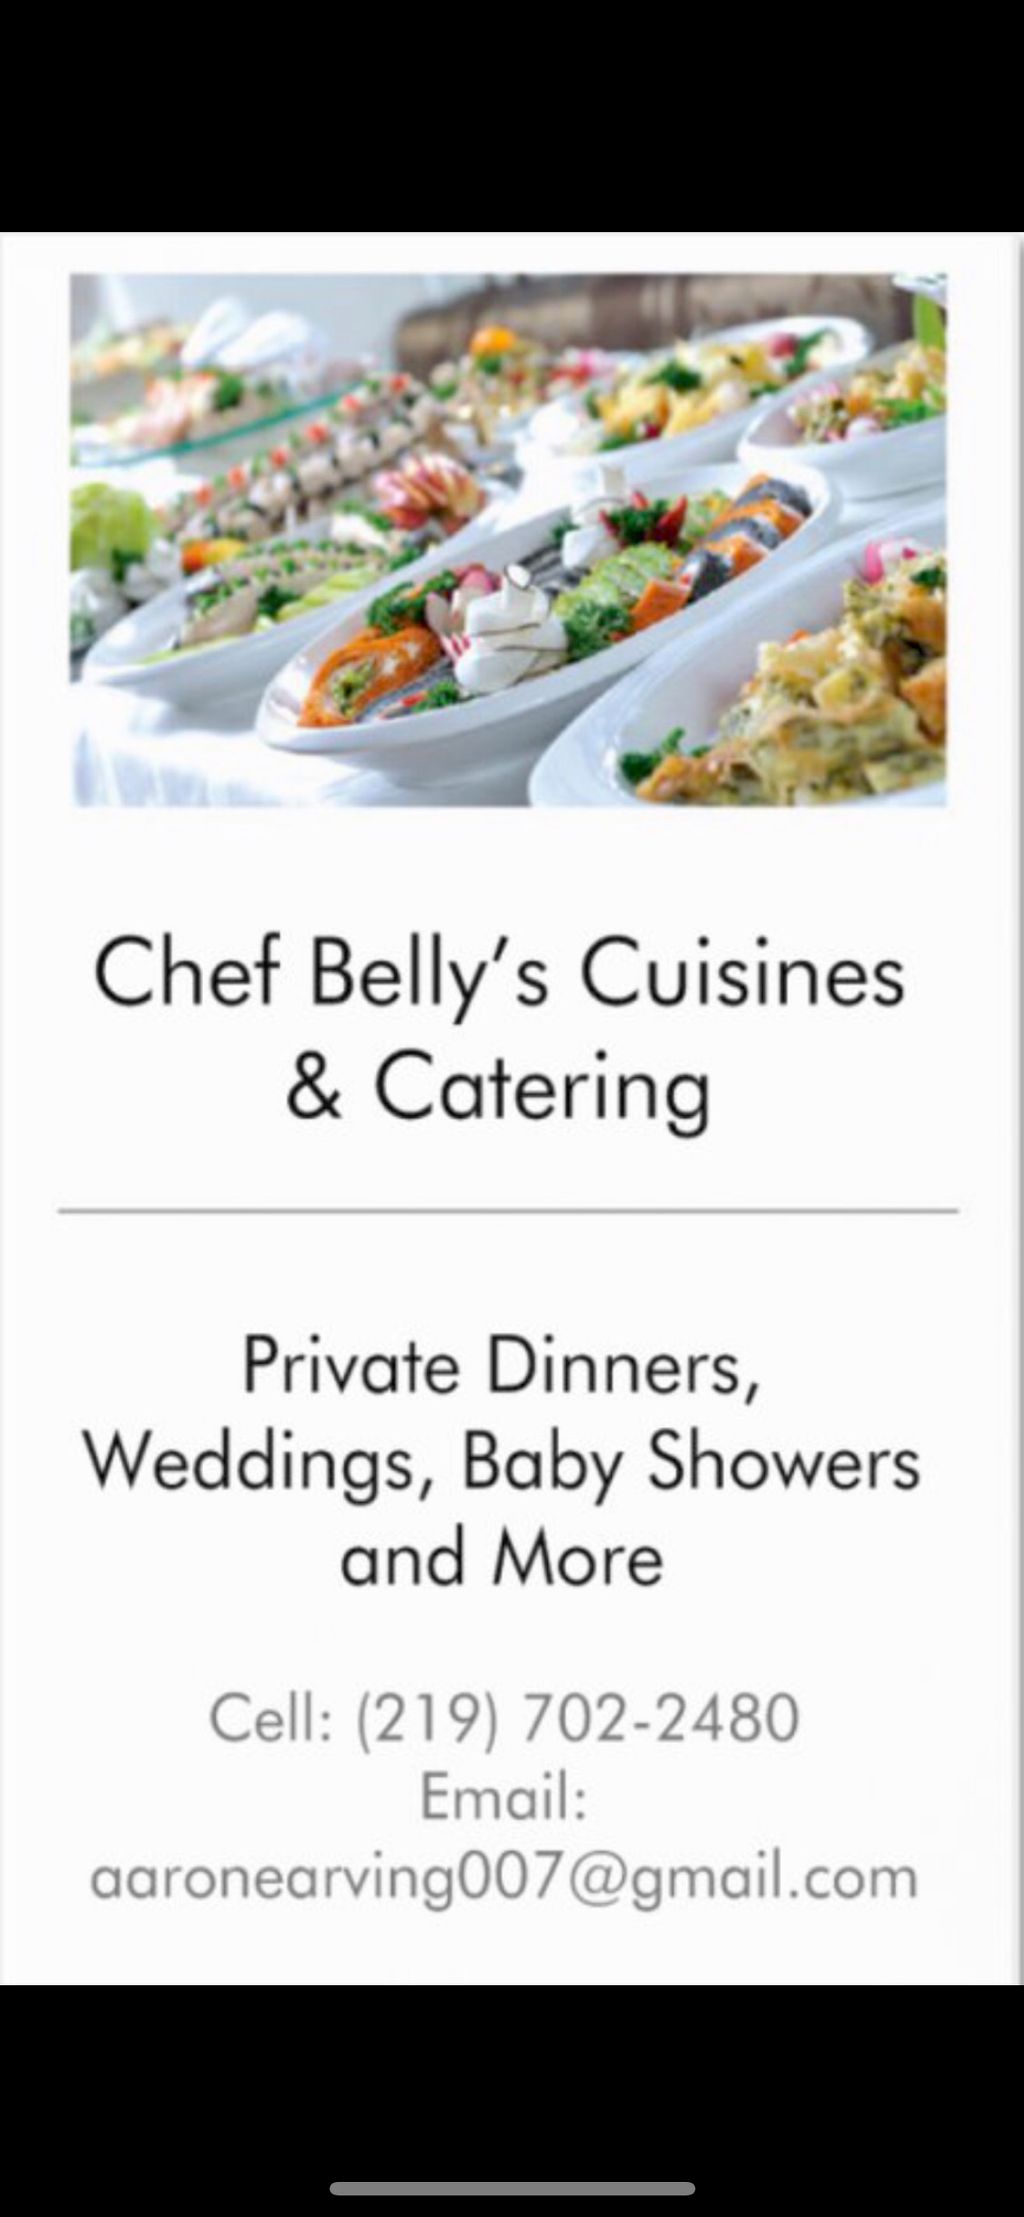 Chef Belly’s Cuisines and Catering